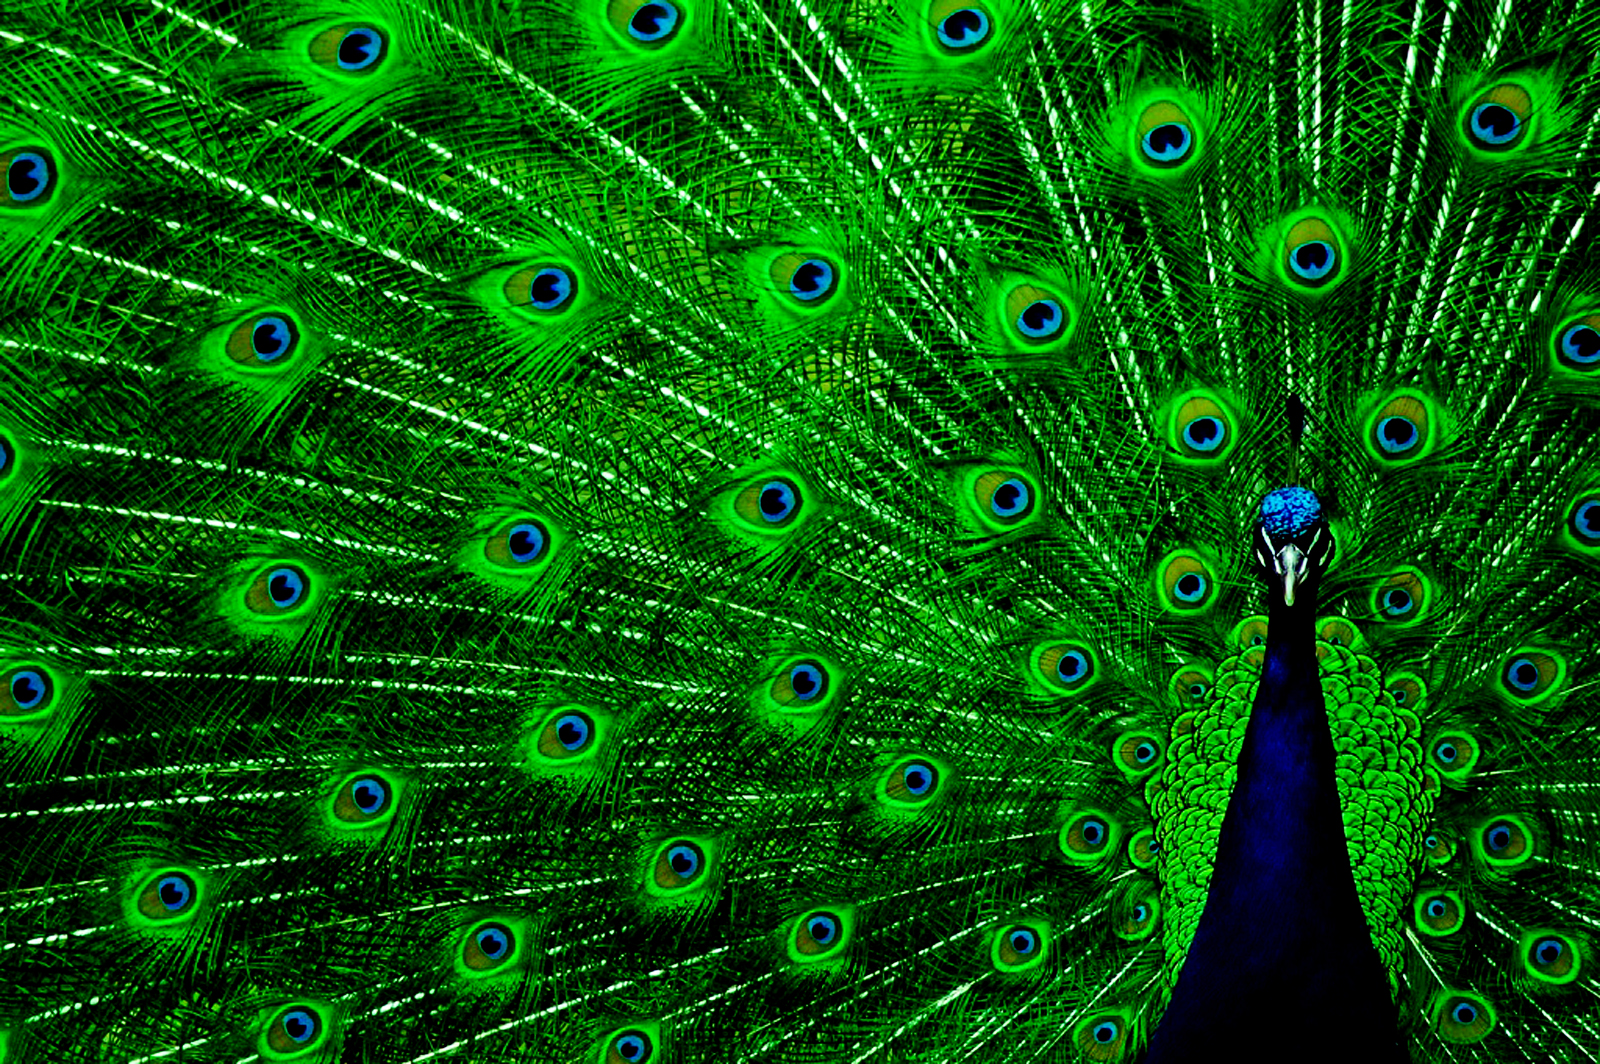 Of Peacock HD Wallpaper High Resolution Background For Your Desktop